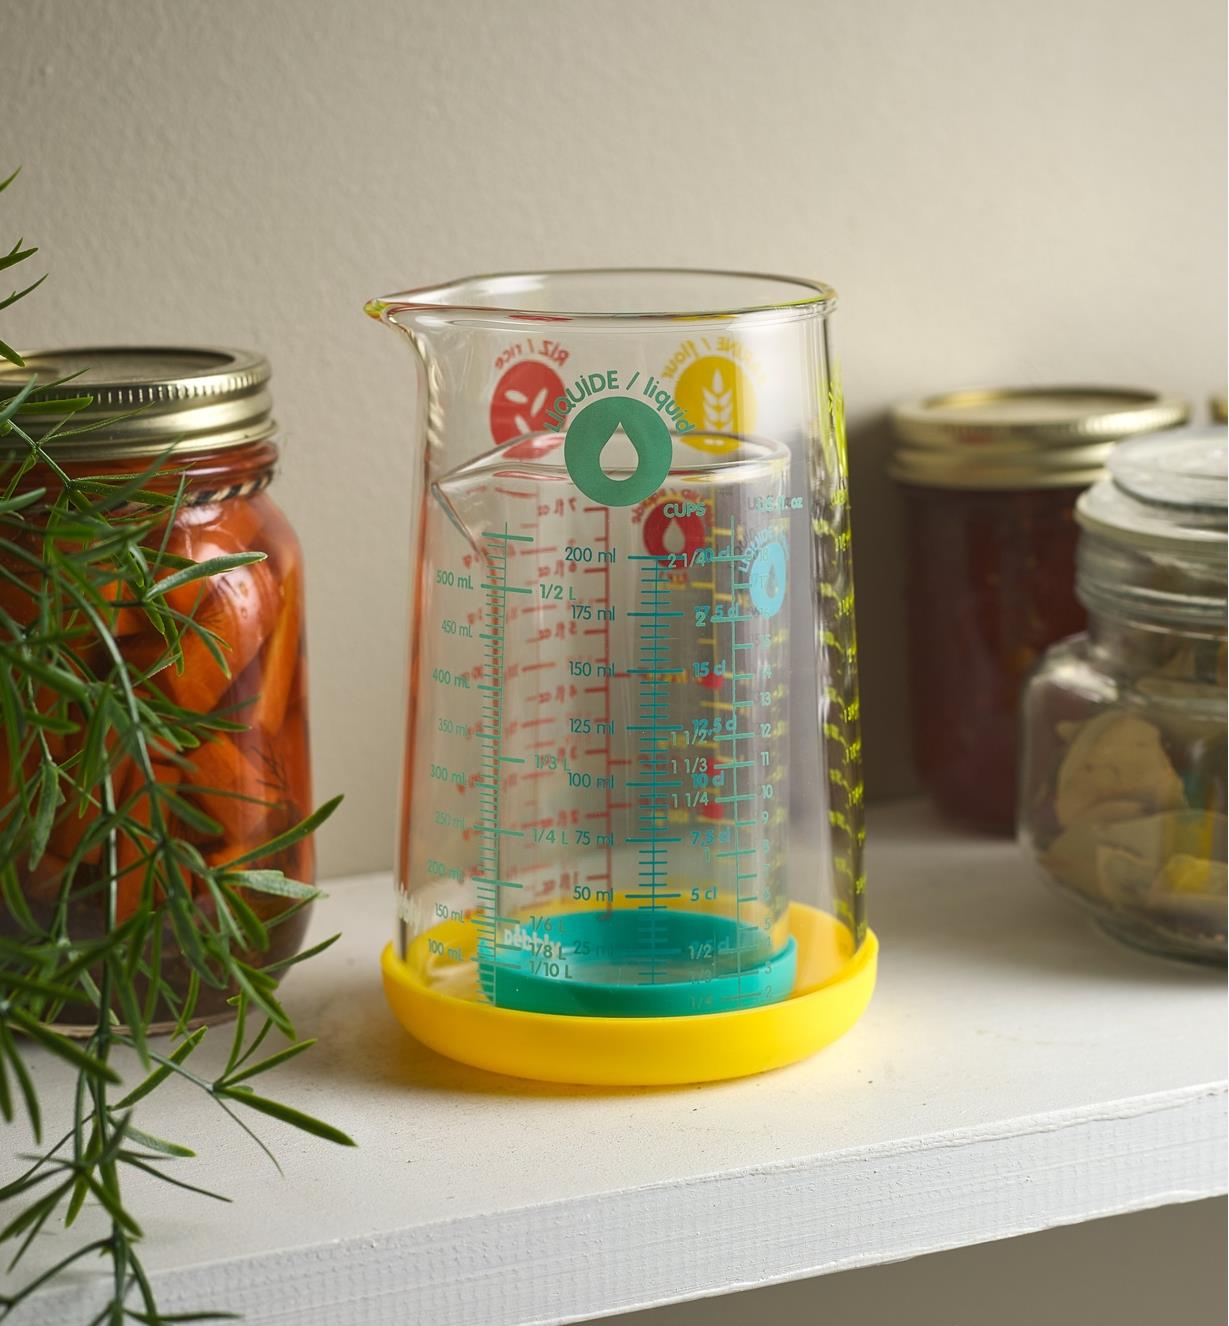 500ml measuring glass on a shelf with a 200ml measuring glass inside it